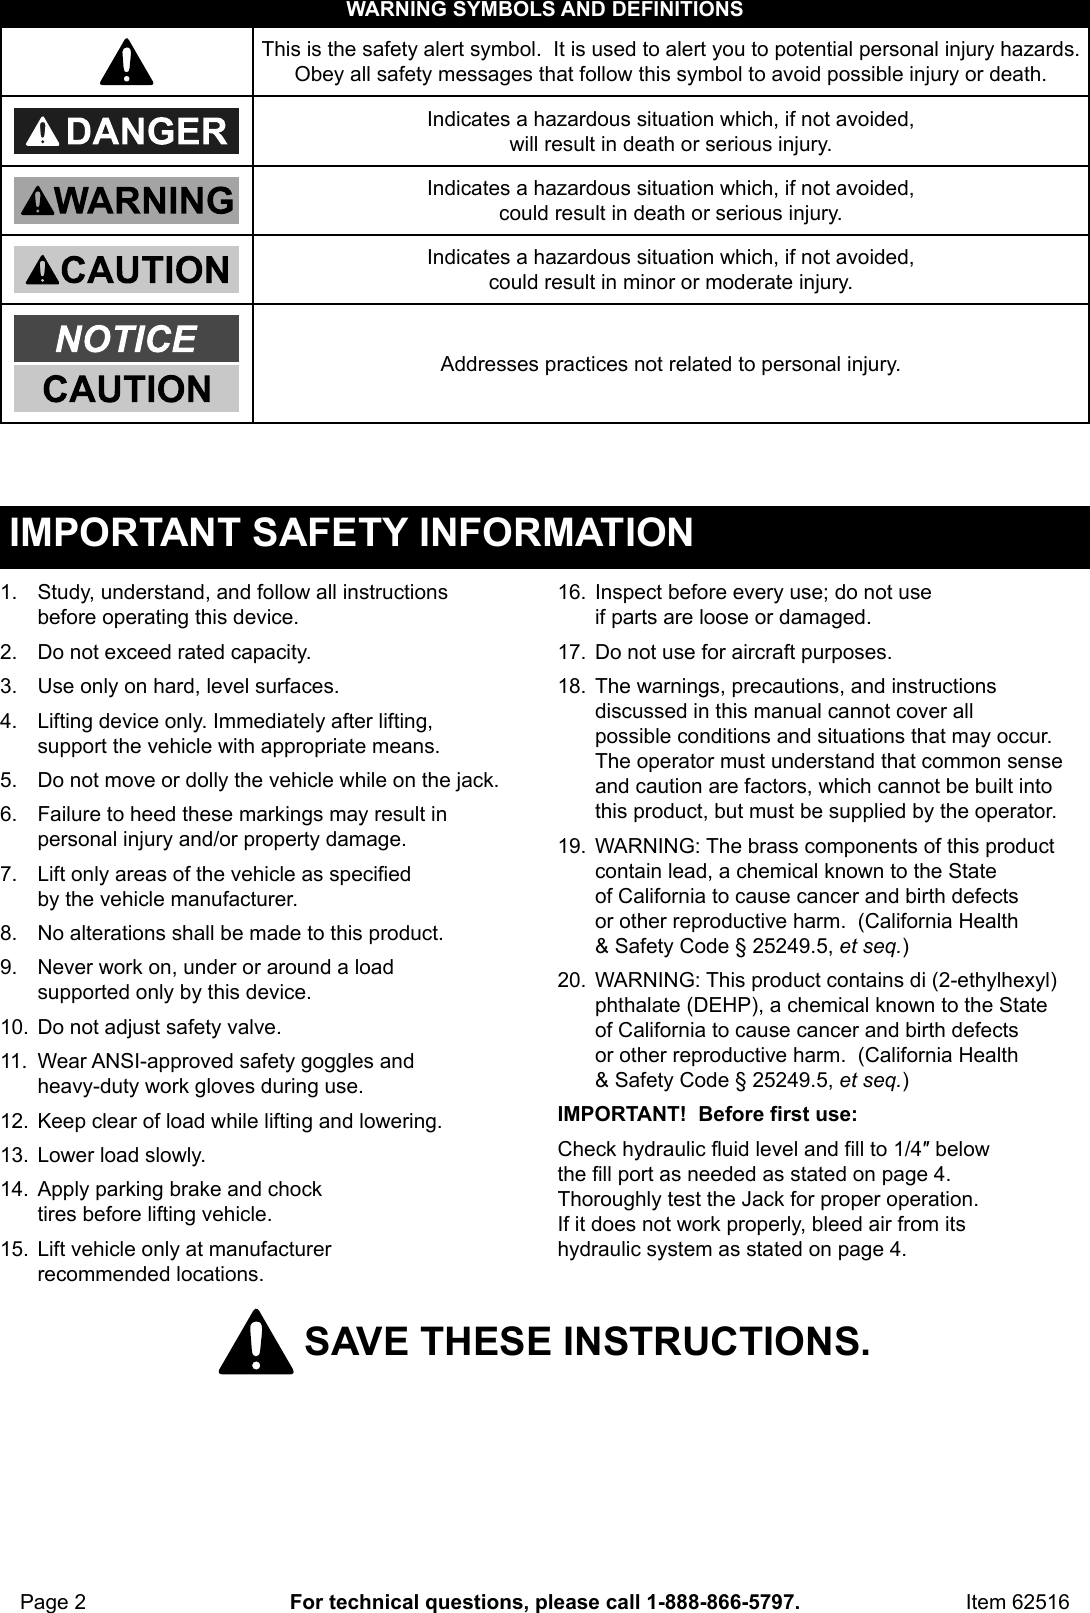 Page 2 of 8 - Manual For The 62516 1.5 Ton Compact Aluminum Racing Floor Jack With Rapid Pump®